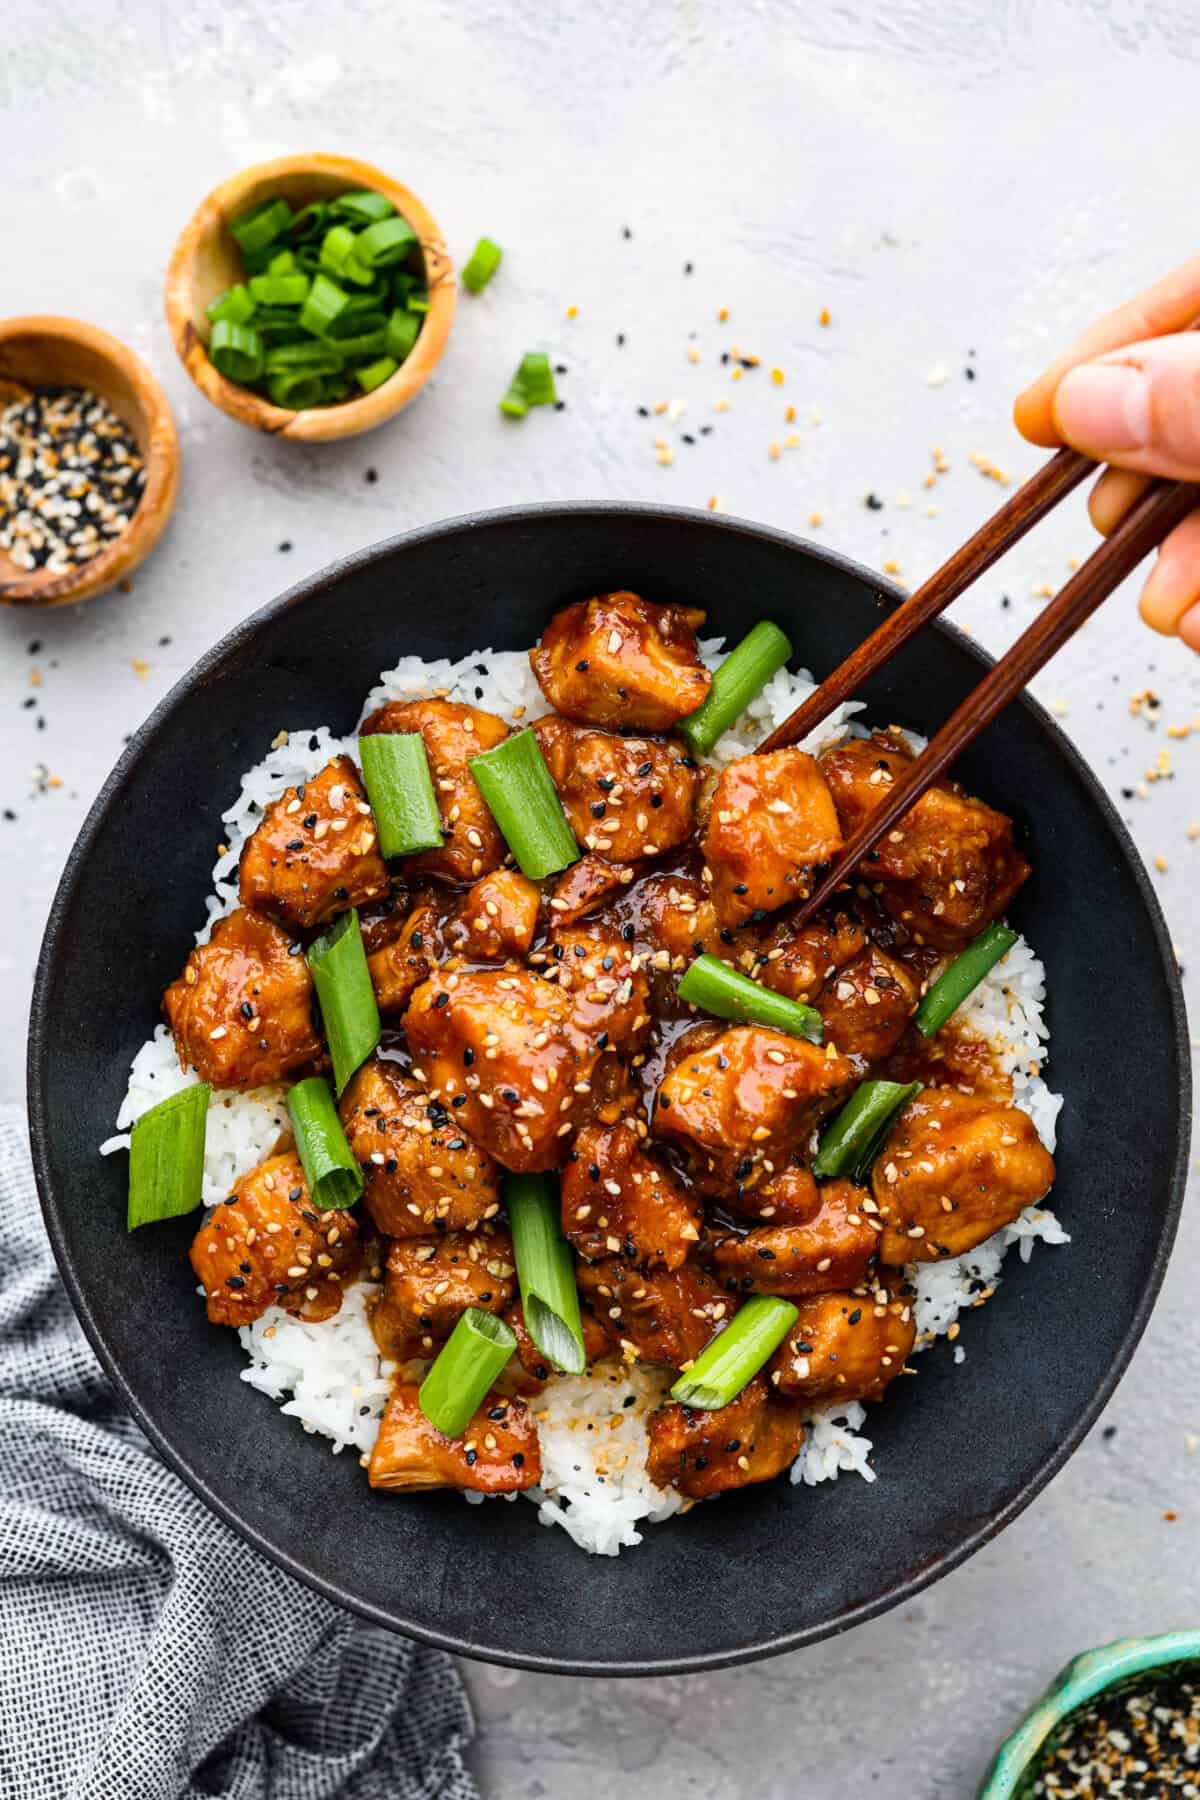 Top view of slow cooker General Tso's chicken in a black bowl served over rice. Garnished with sesame seeds and green onions. Chopsticks are picking up a piece of chicken.